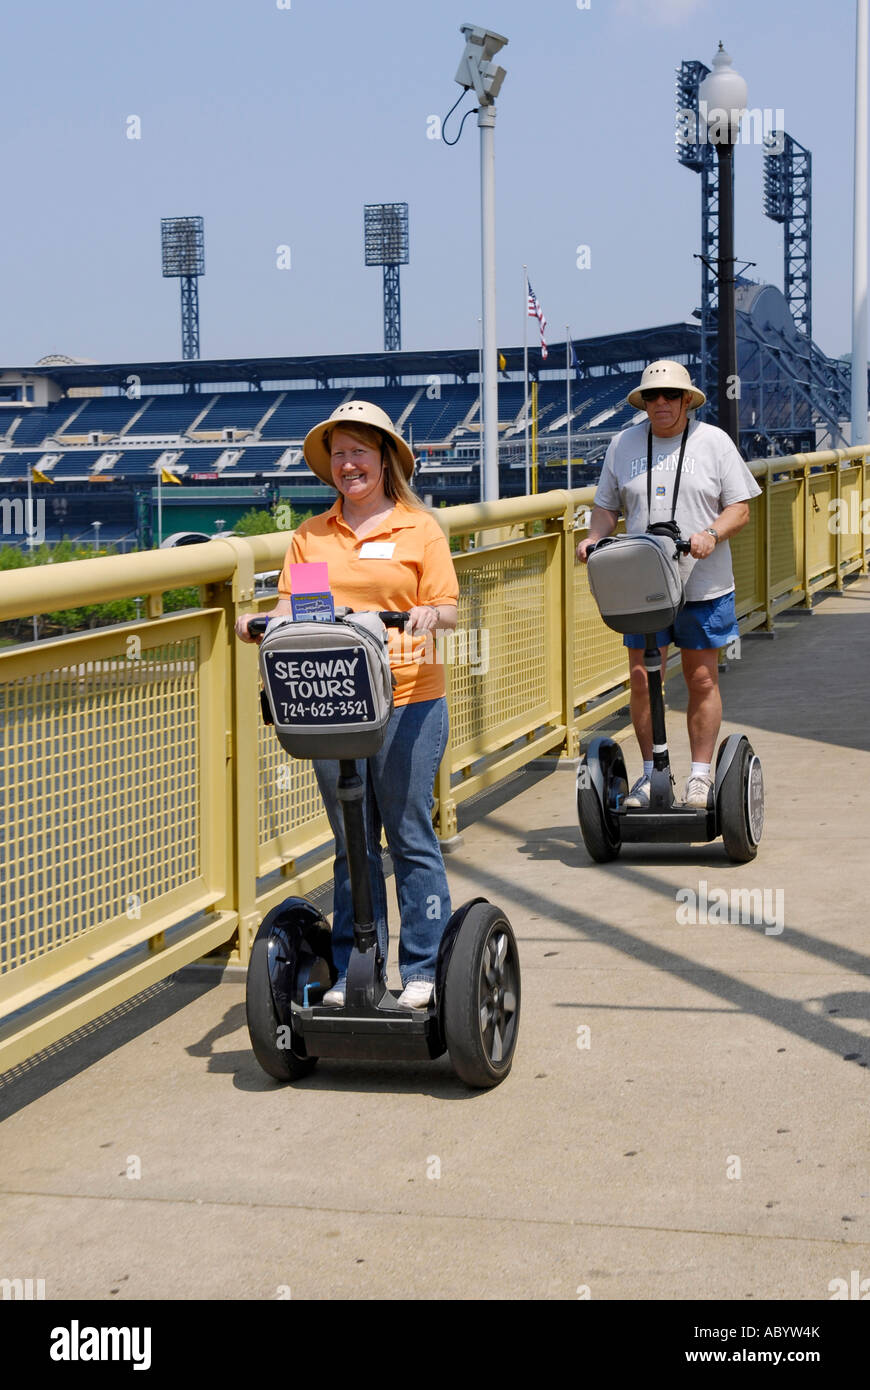 Segway Pittsburgh  Segway Tours & Excursions in Pittsburgh PA